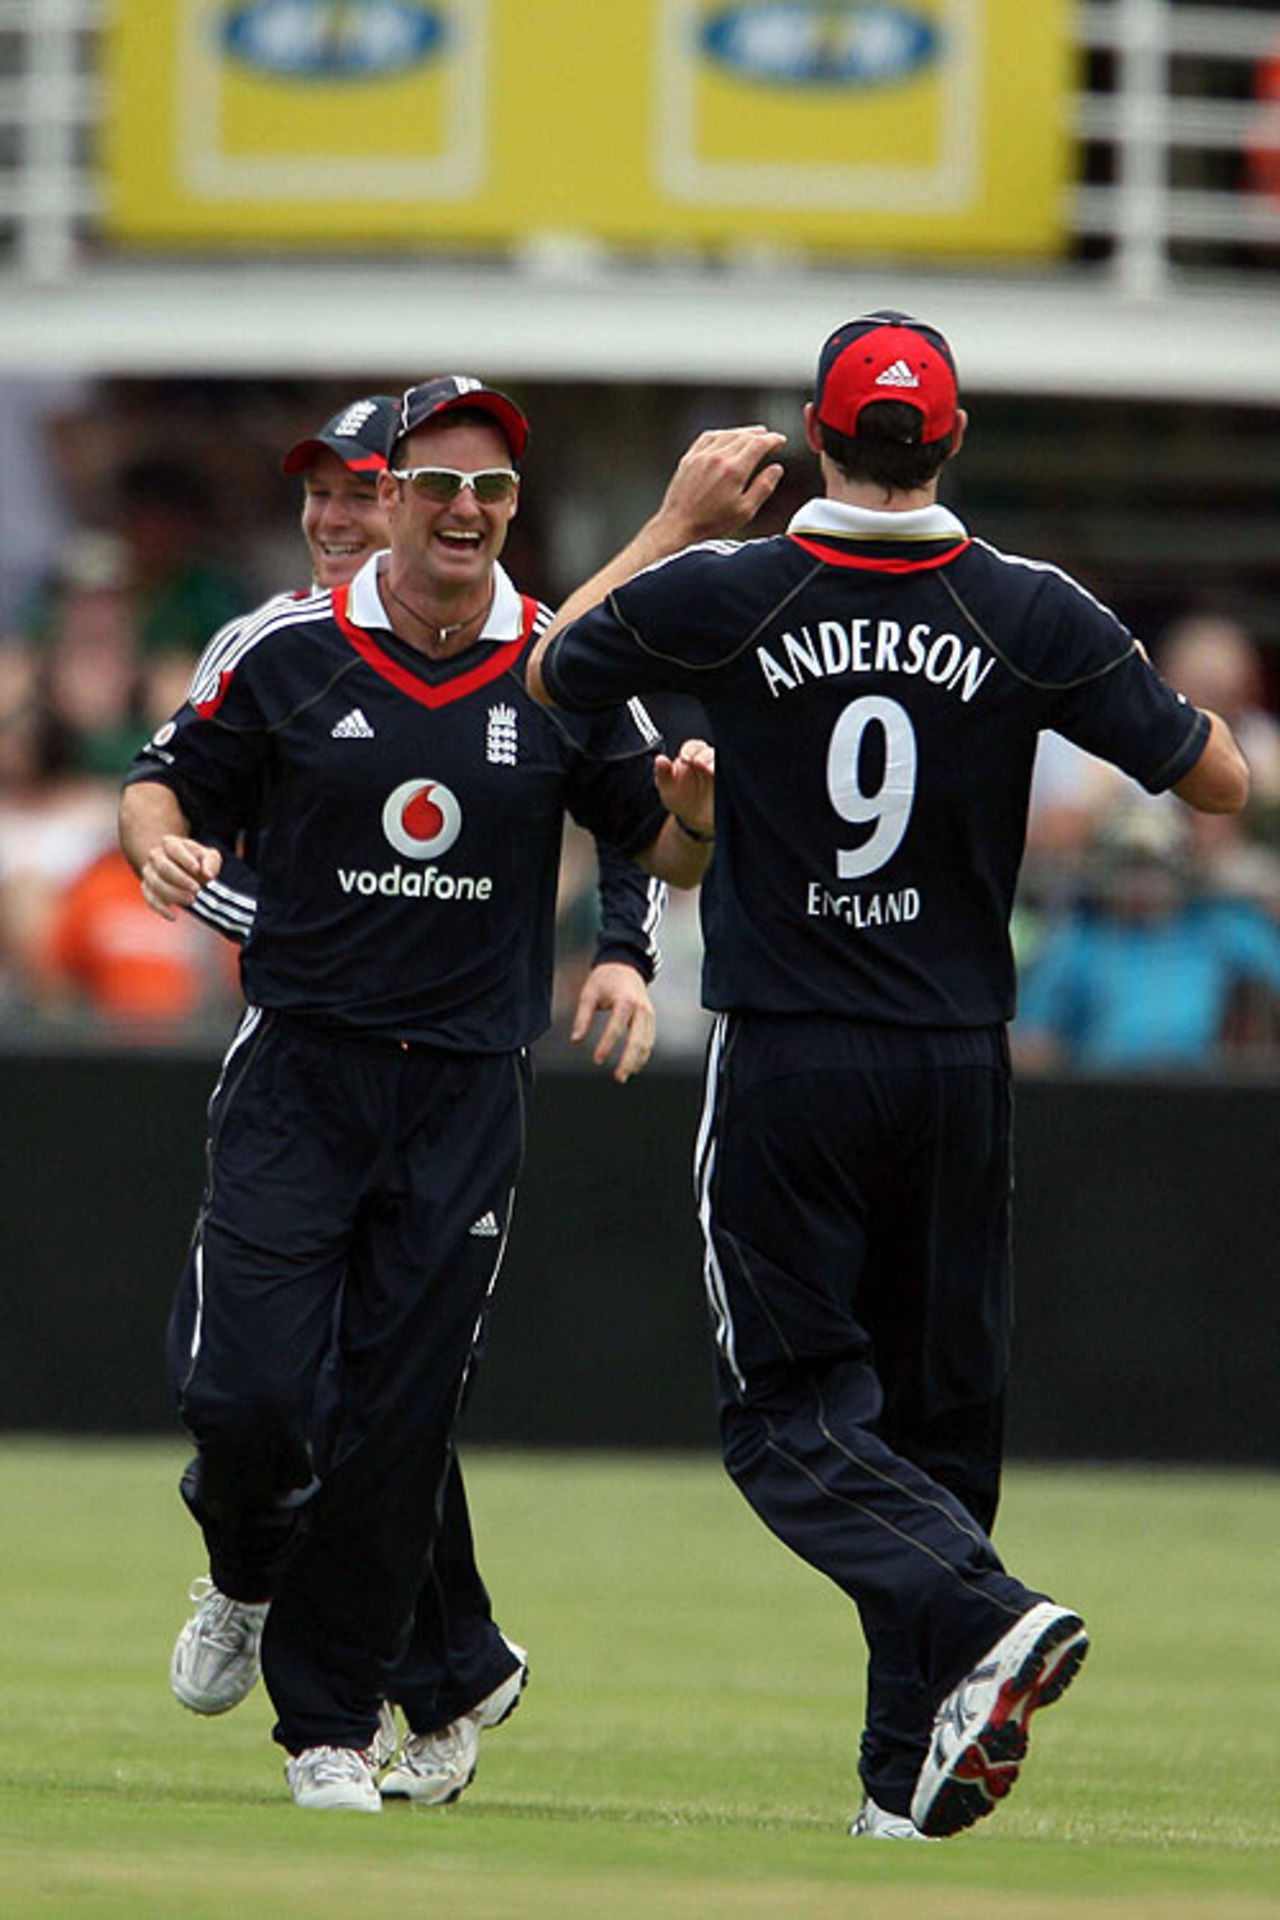 Andrew Strauss and James Anderson celebrate as South Africa are bowled out for 119, South Africa v England, 4th ODI, Port Elizabeth, November 29, 2009